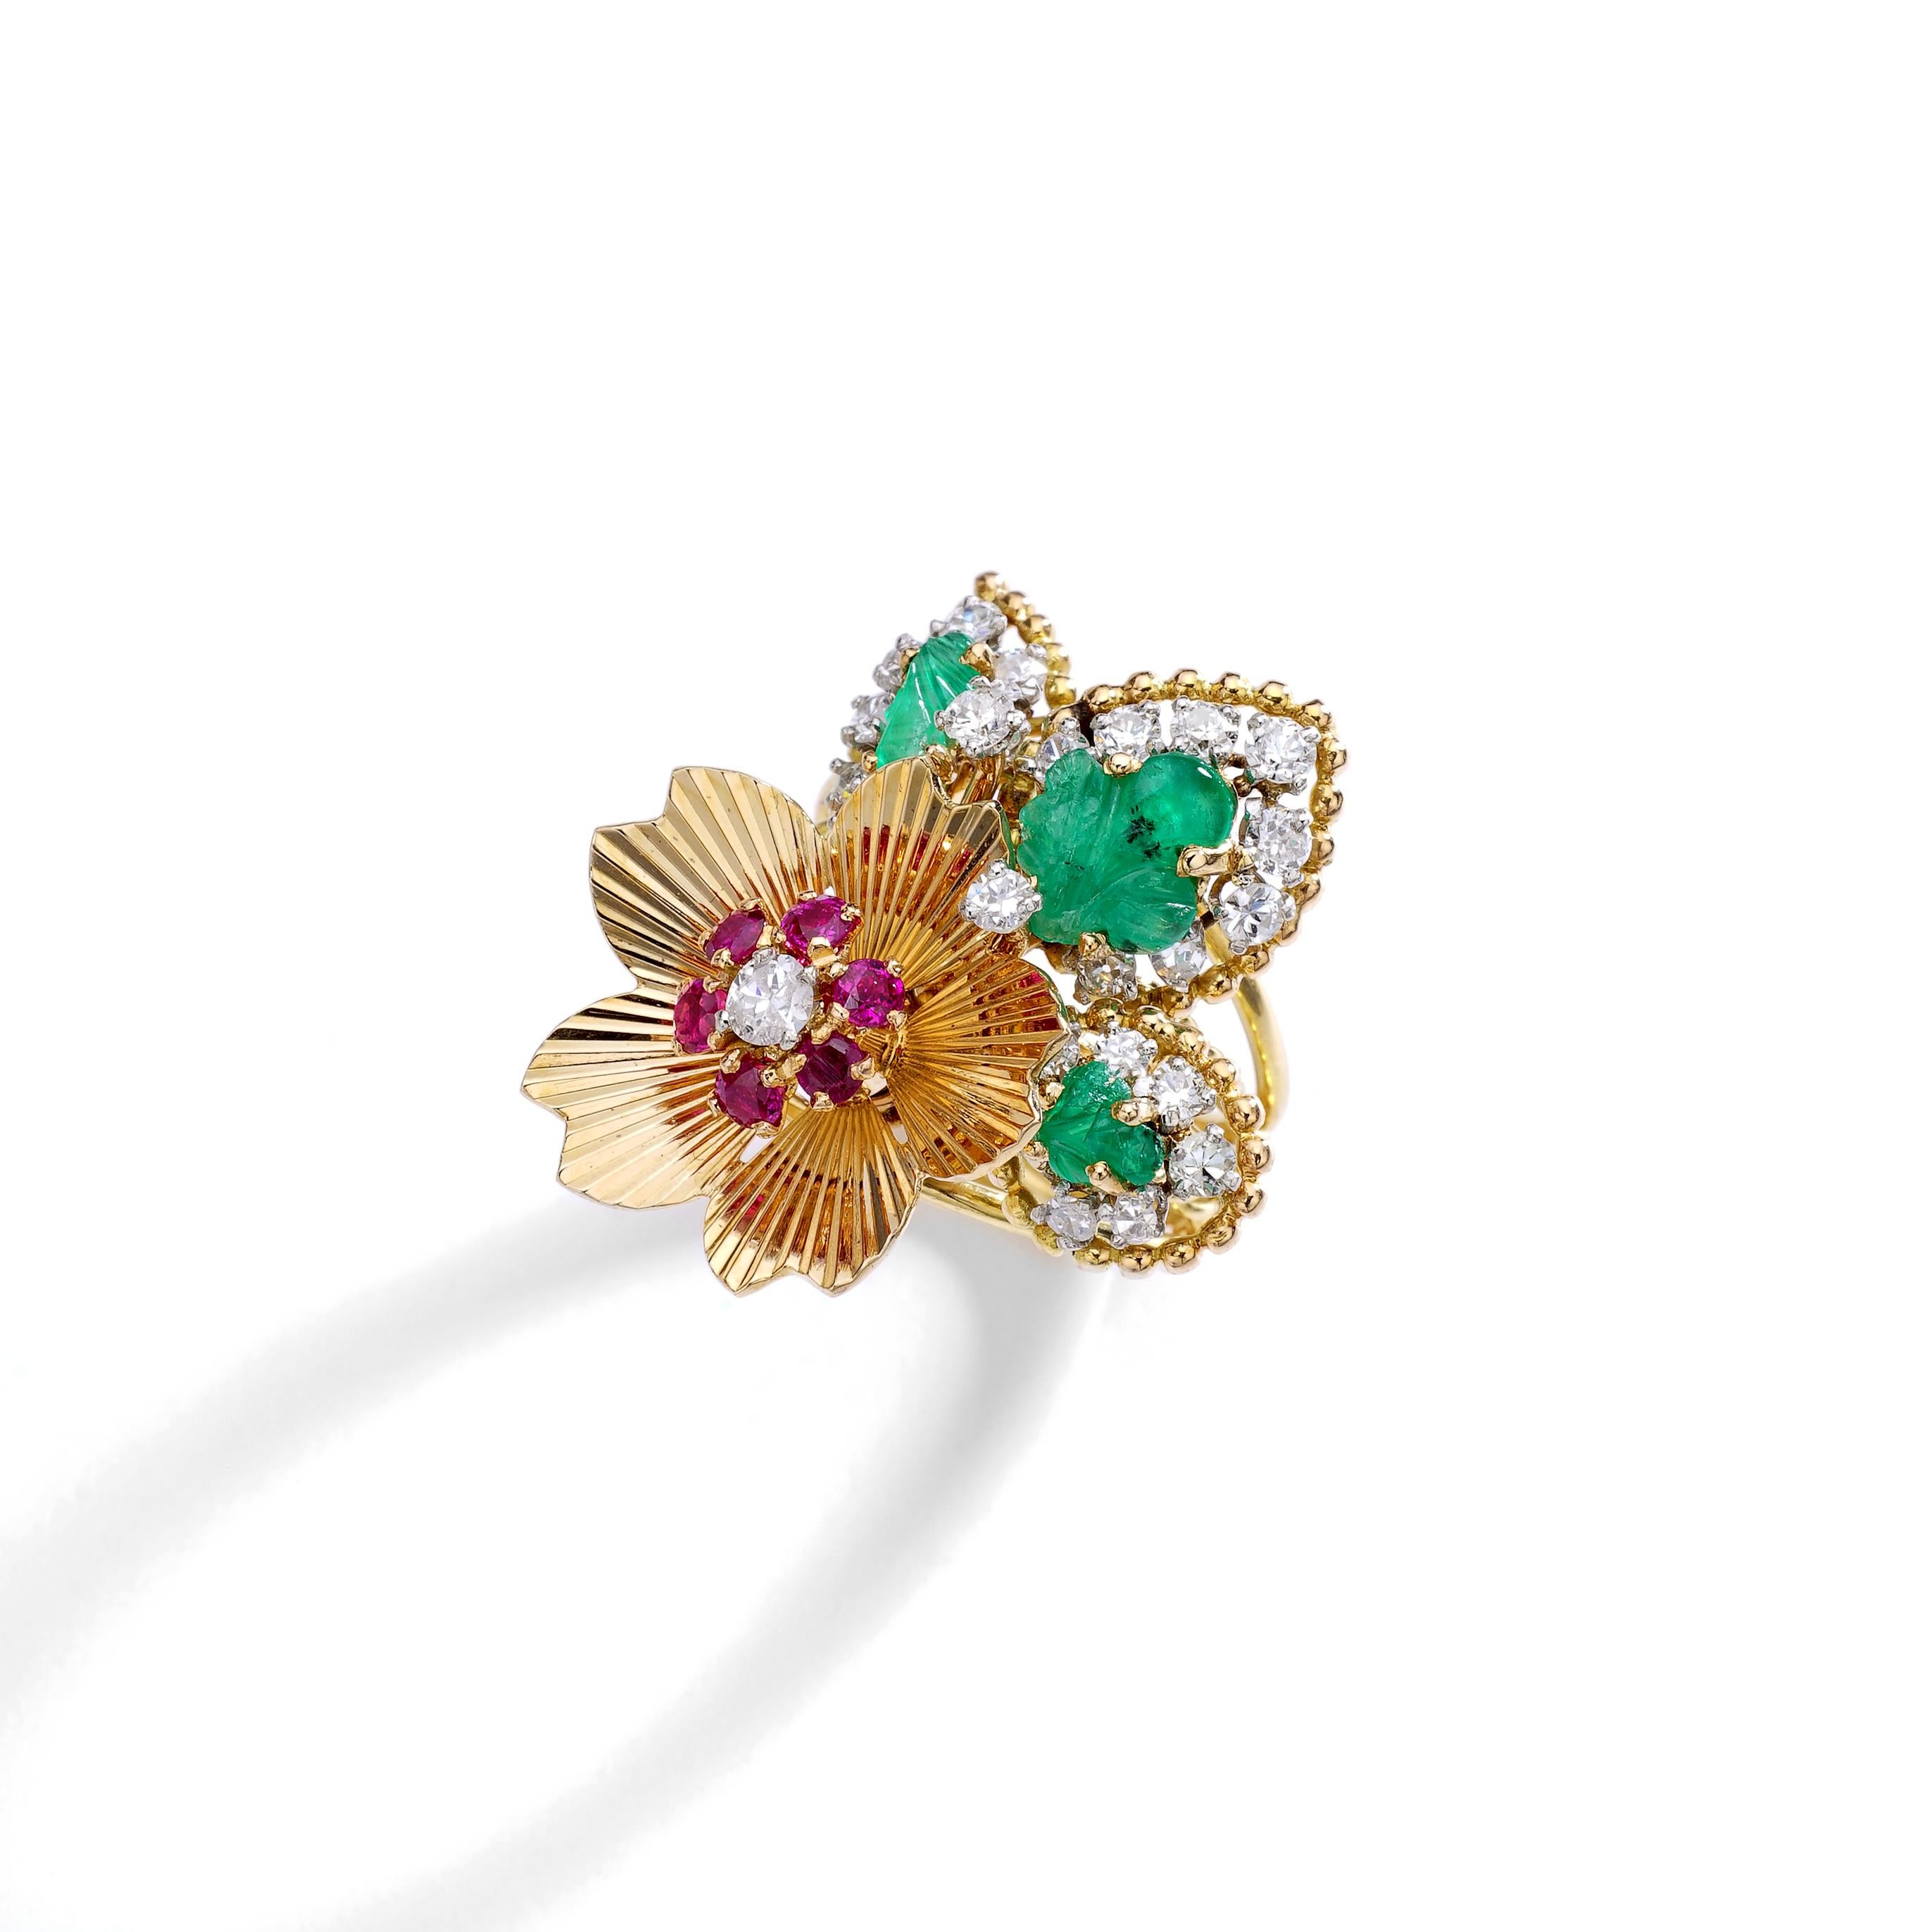 Lovely ring in yellow gold 18k and platinum with Diamond, Ruby and carved Emerald.
Circa 1950.

Ring size: 5 1/2.

Length on the finger top part: 0.99 inch (2.50 centimeters) approximately.
